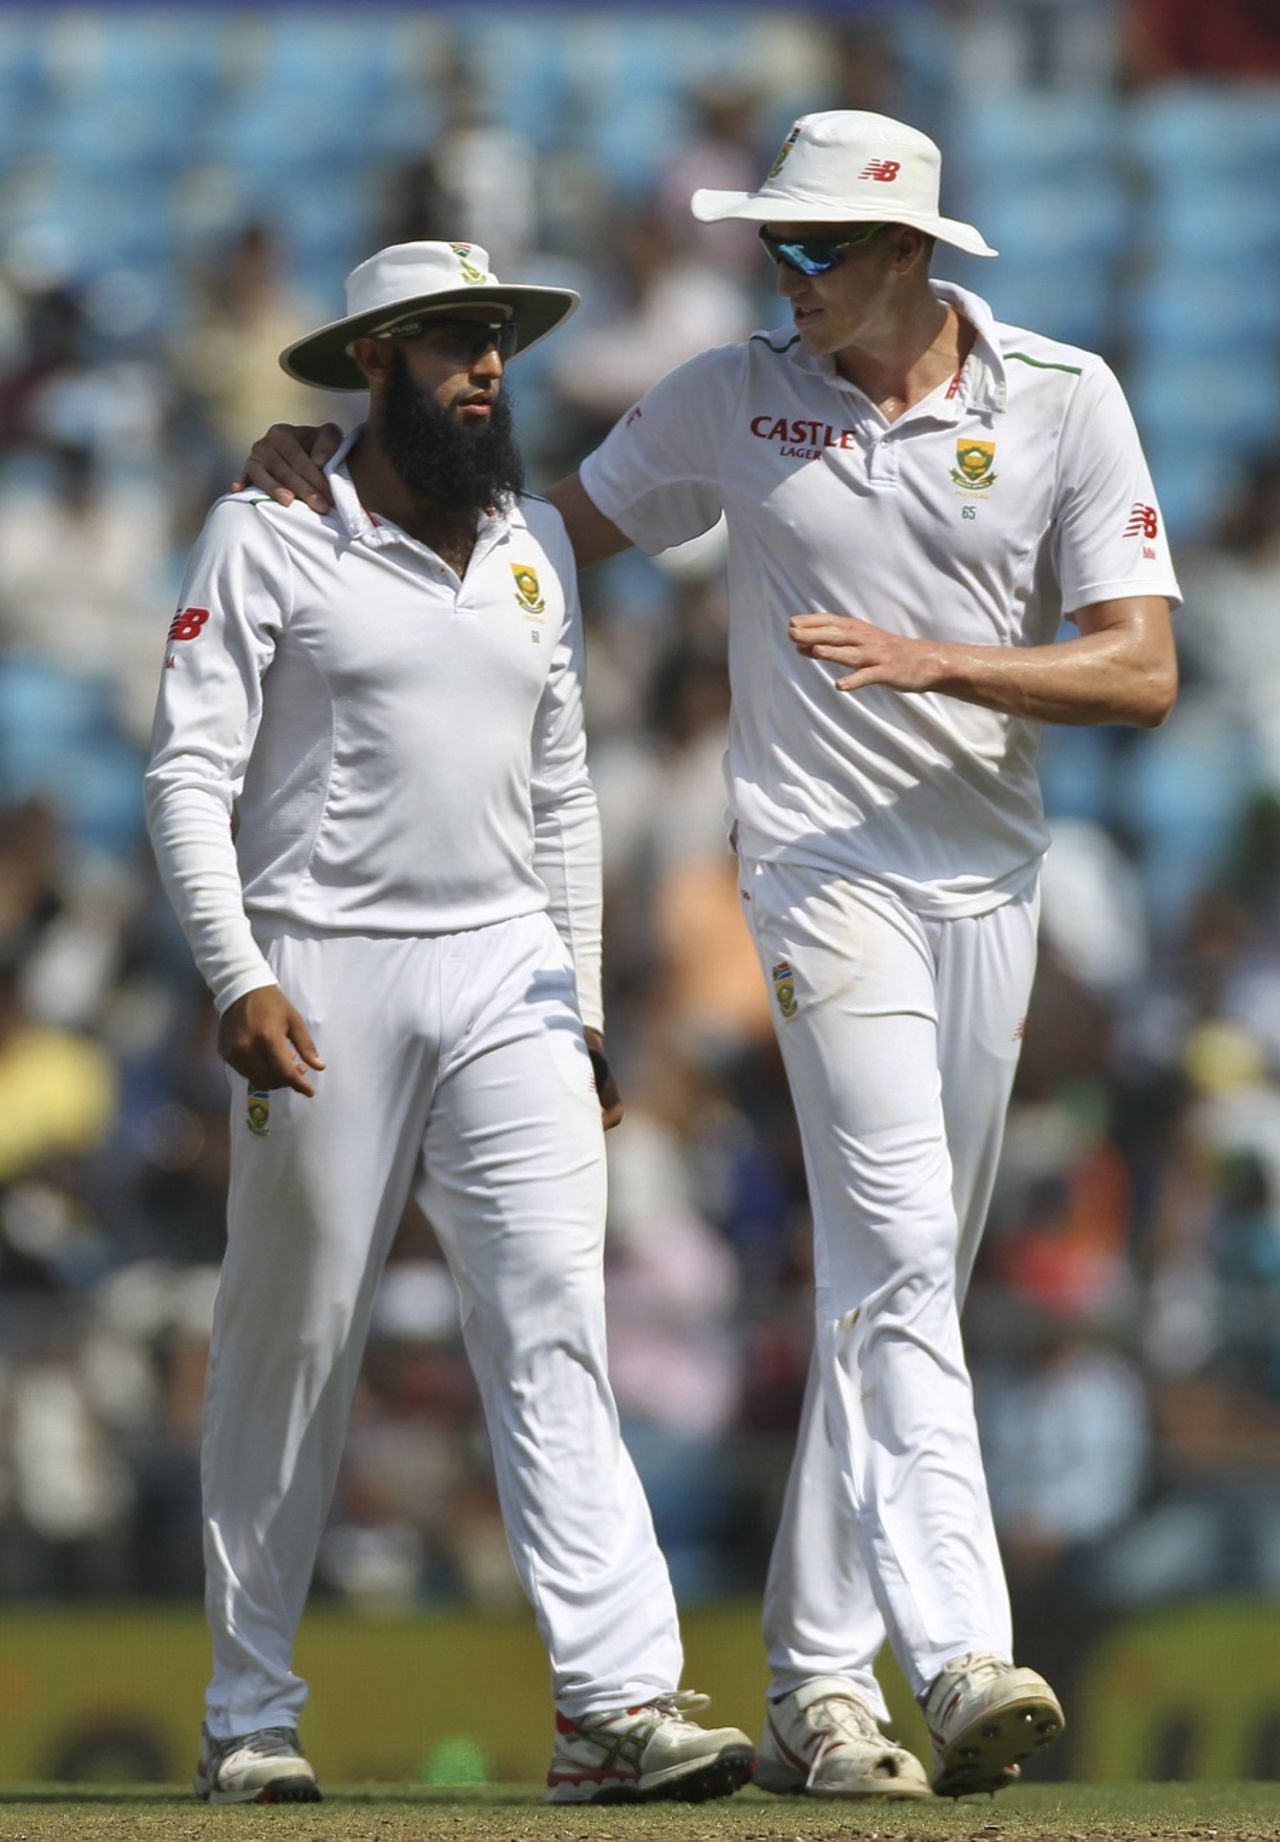 Hashim Amla has a chat with Morne Morkel, India v South Africa, 3rd Test, Nagpur, 1st day, November 25, 2015